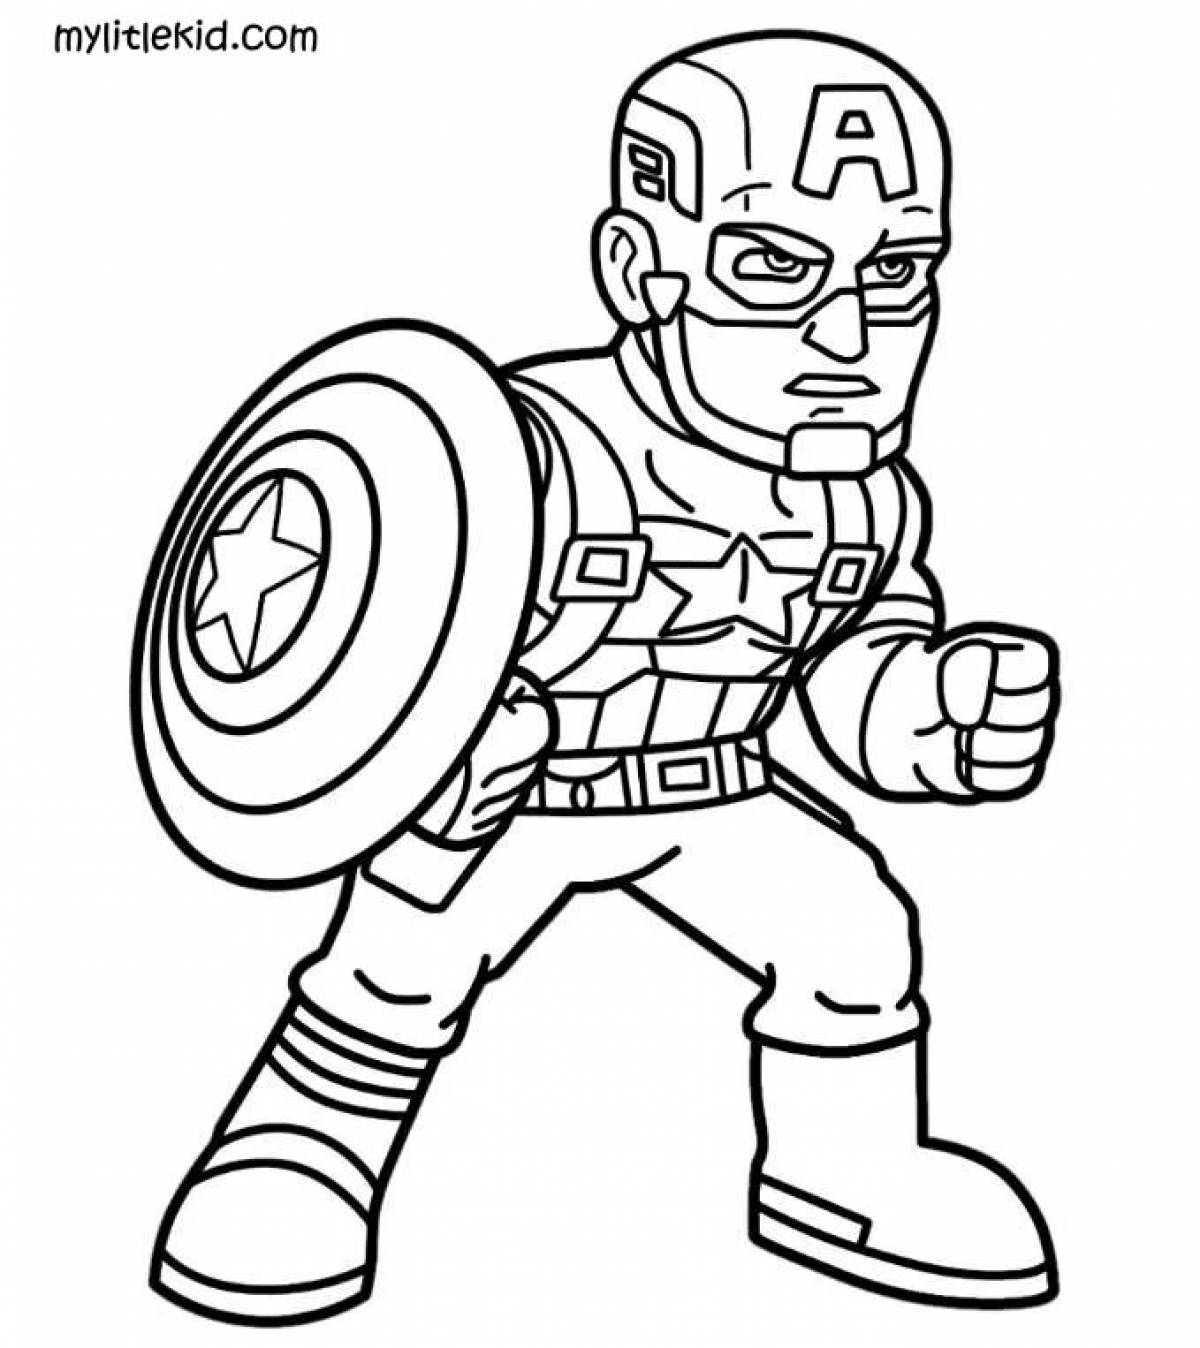 Captain america creative coloring for kids